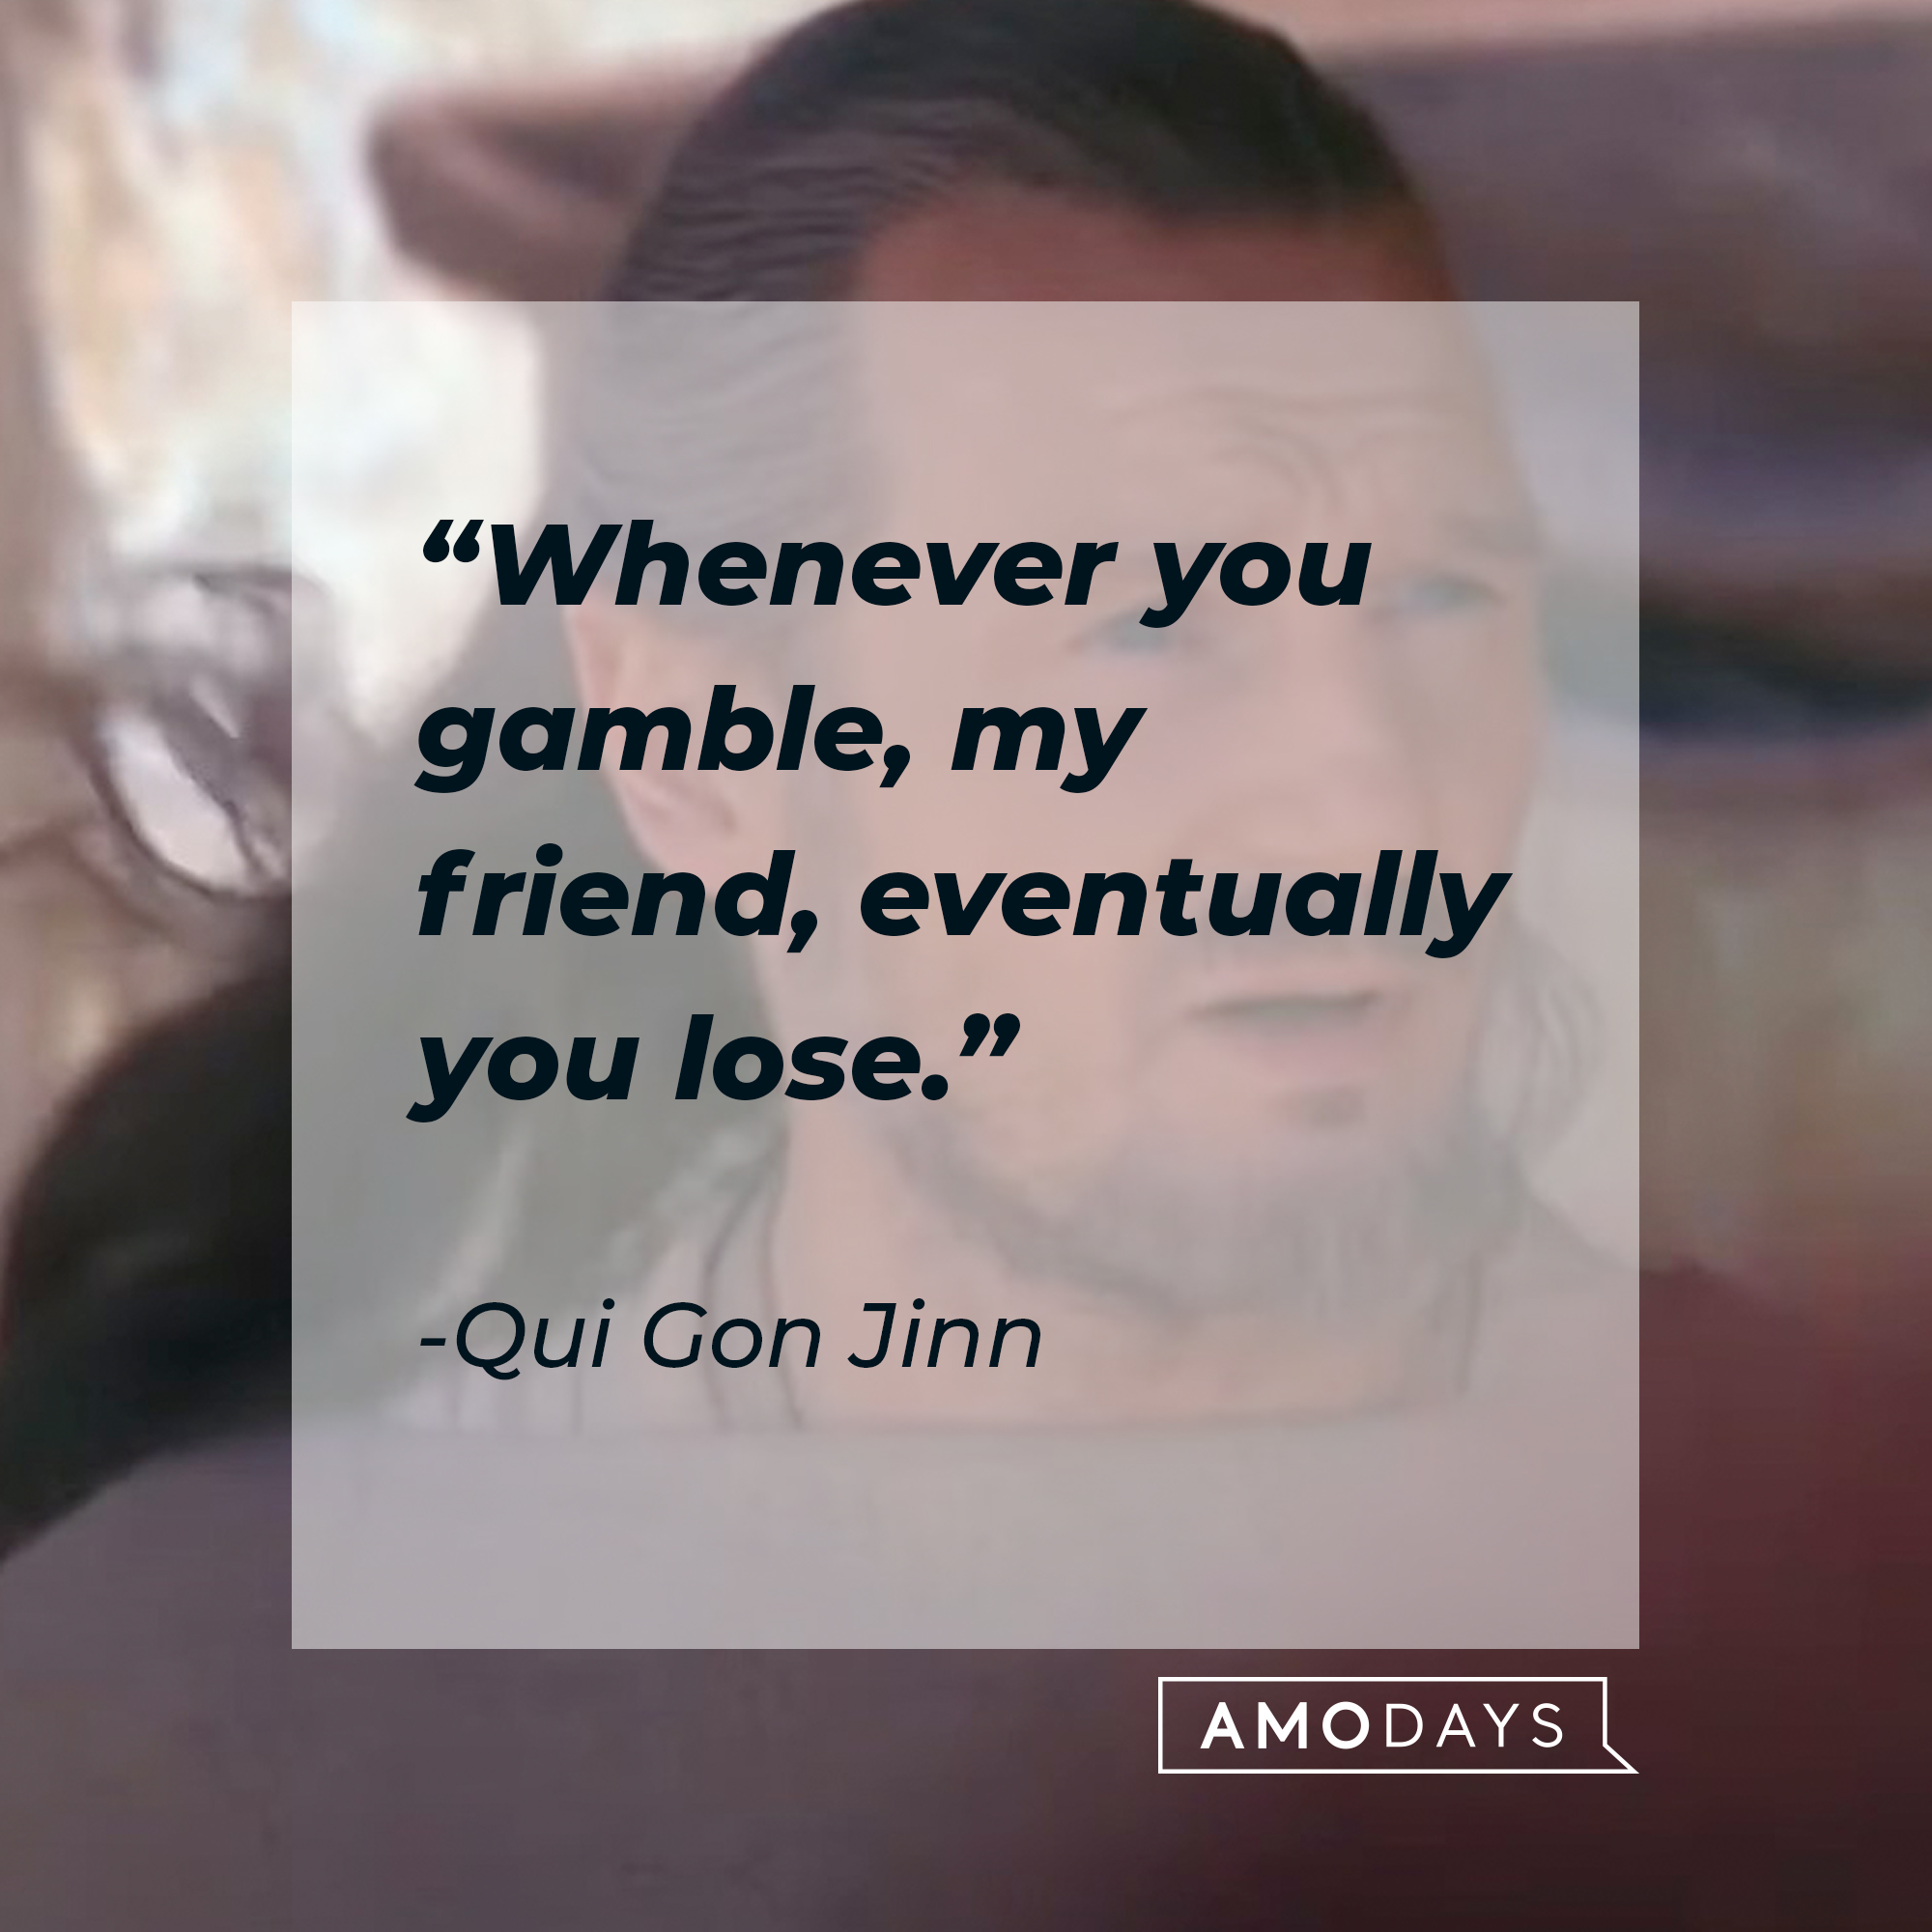 A picture of Qui Gon Jinn with a quote by him:  “Whenever you gamble, my friend, eventually you lose.” | Source: facebook.com/StarWars